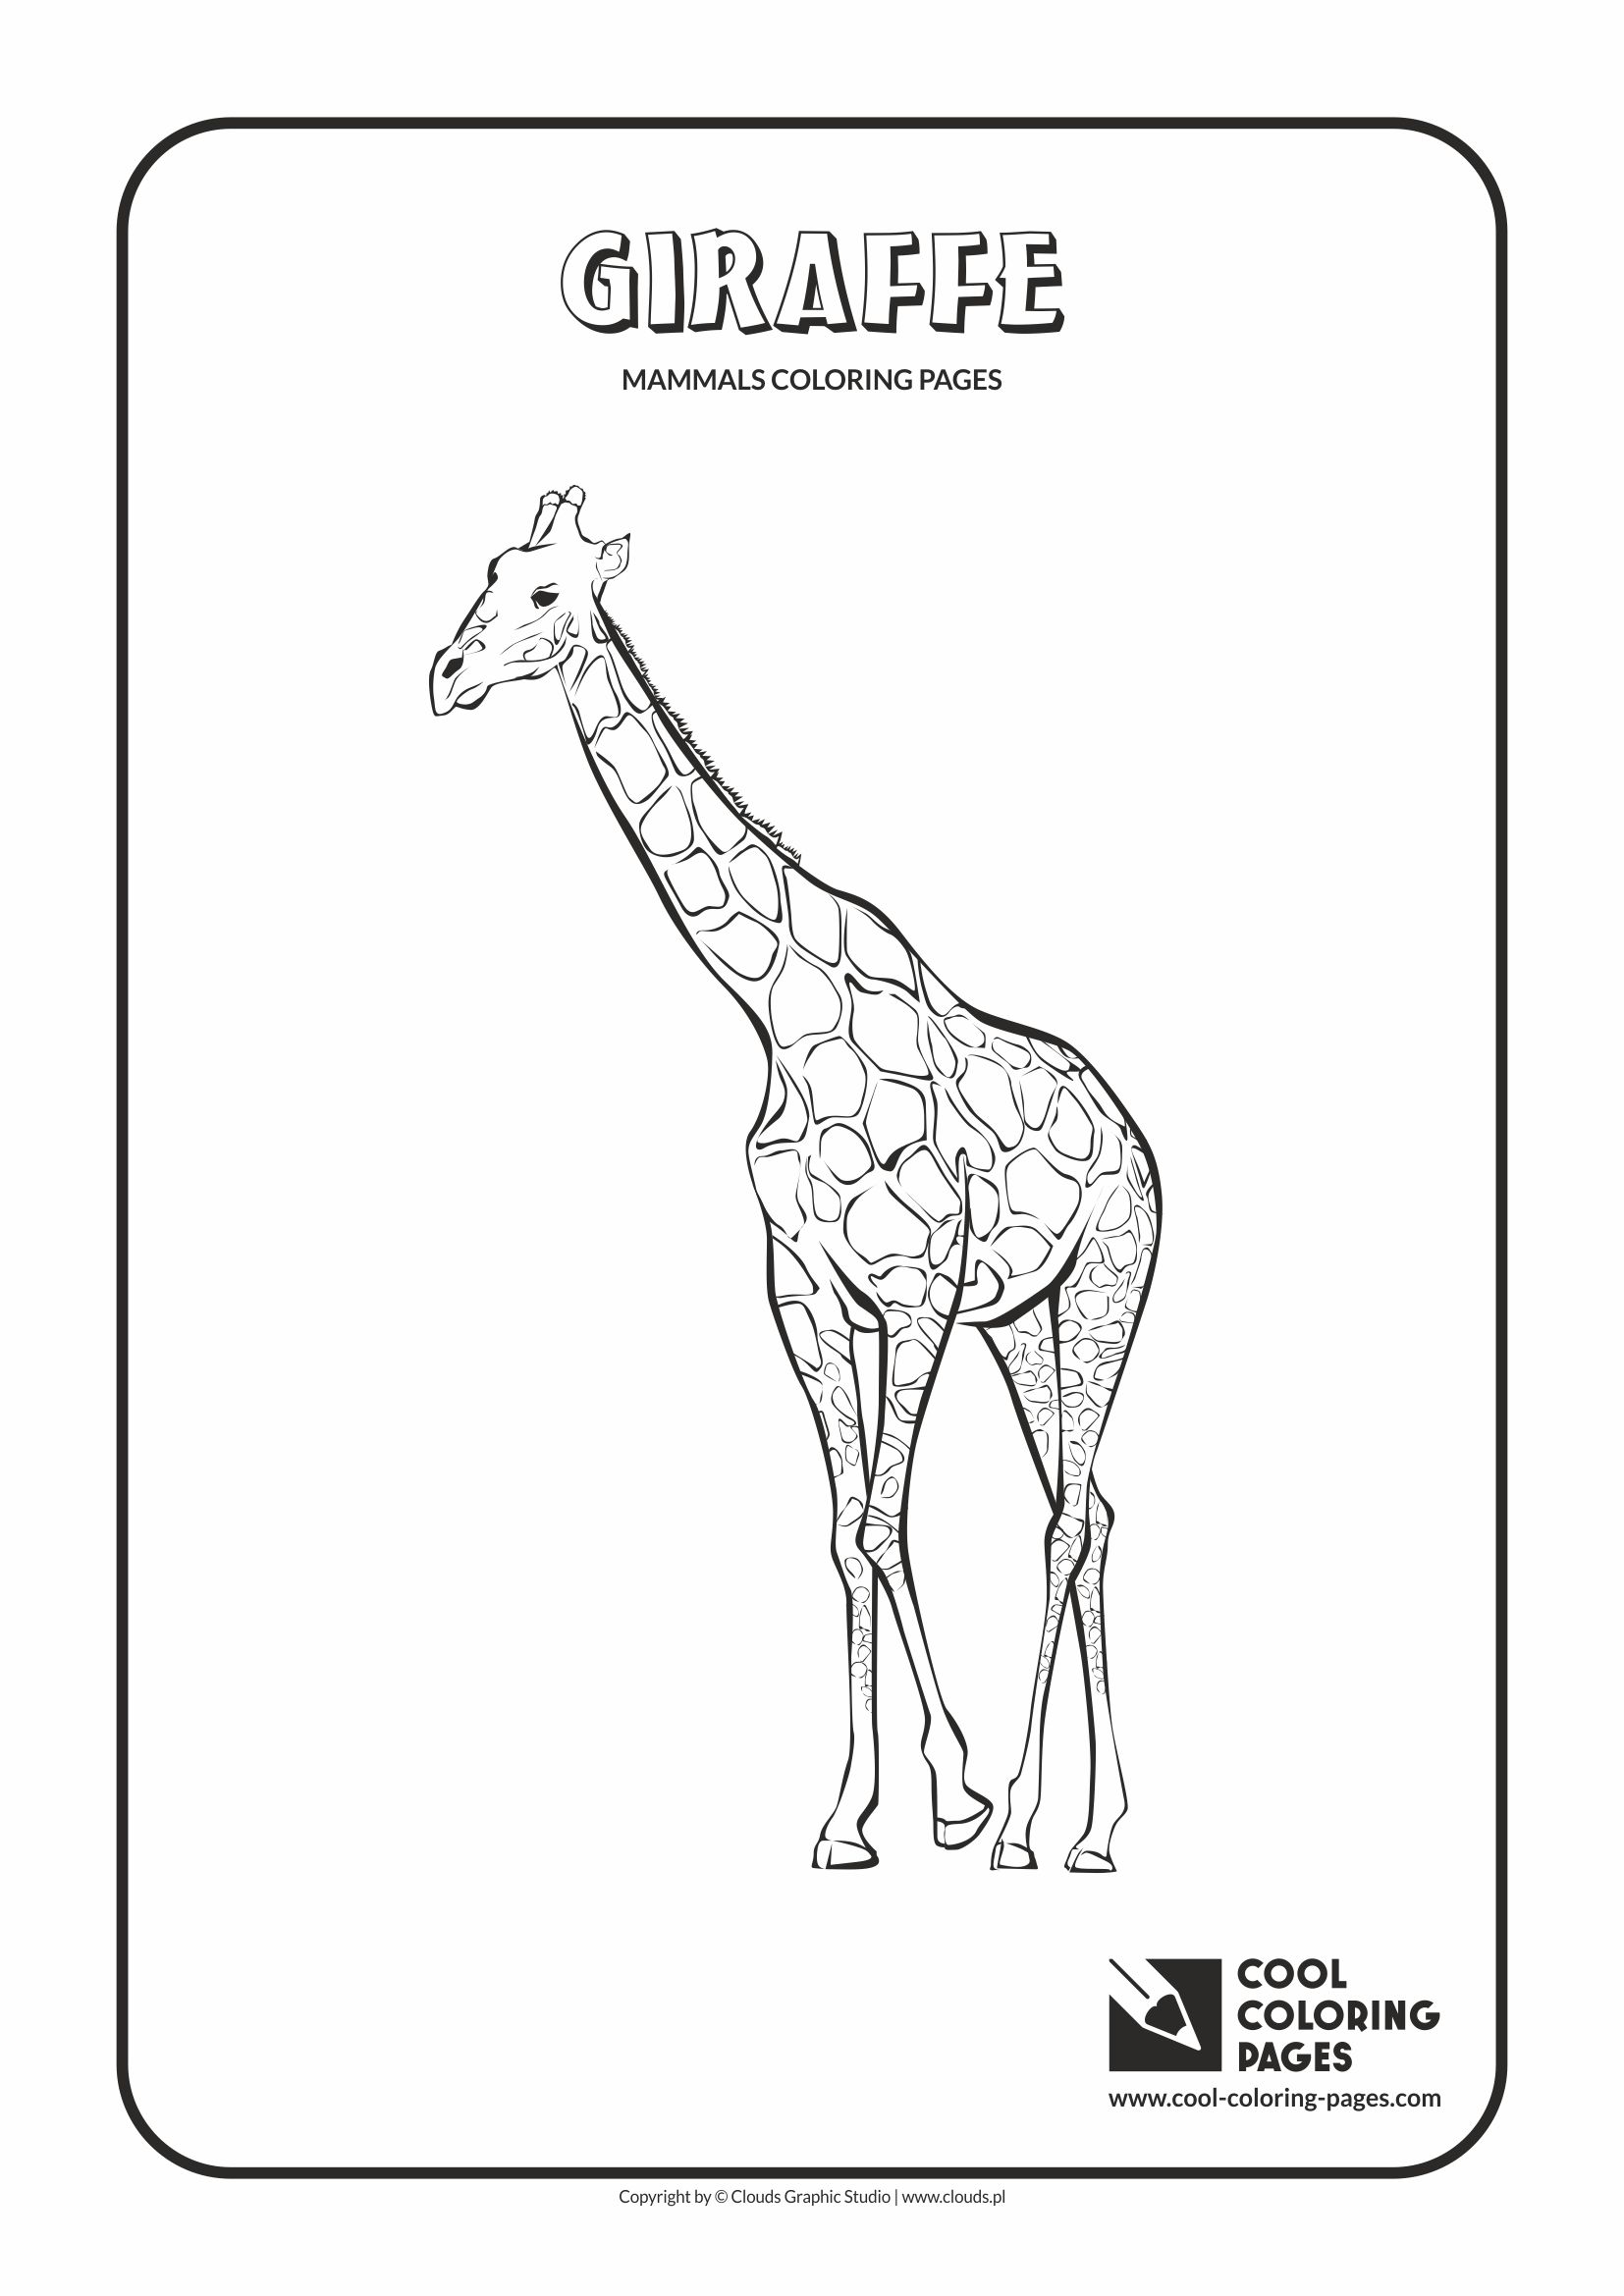 Cool Coloring Pages - Animals / Giraffe Coloring page with giraffe